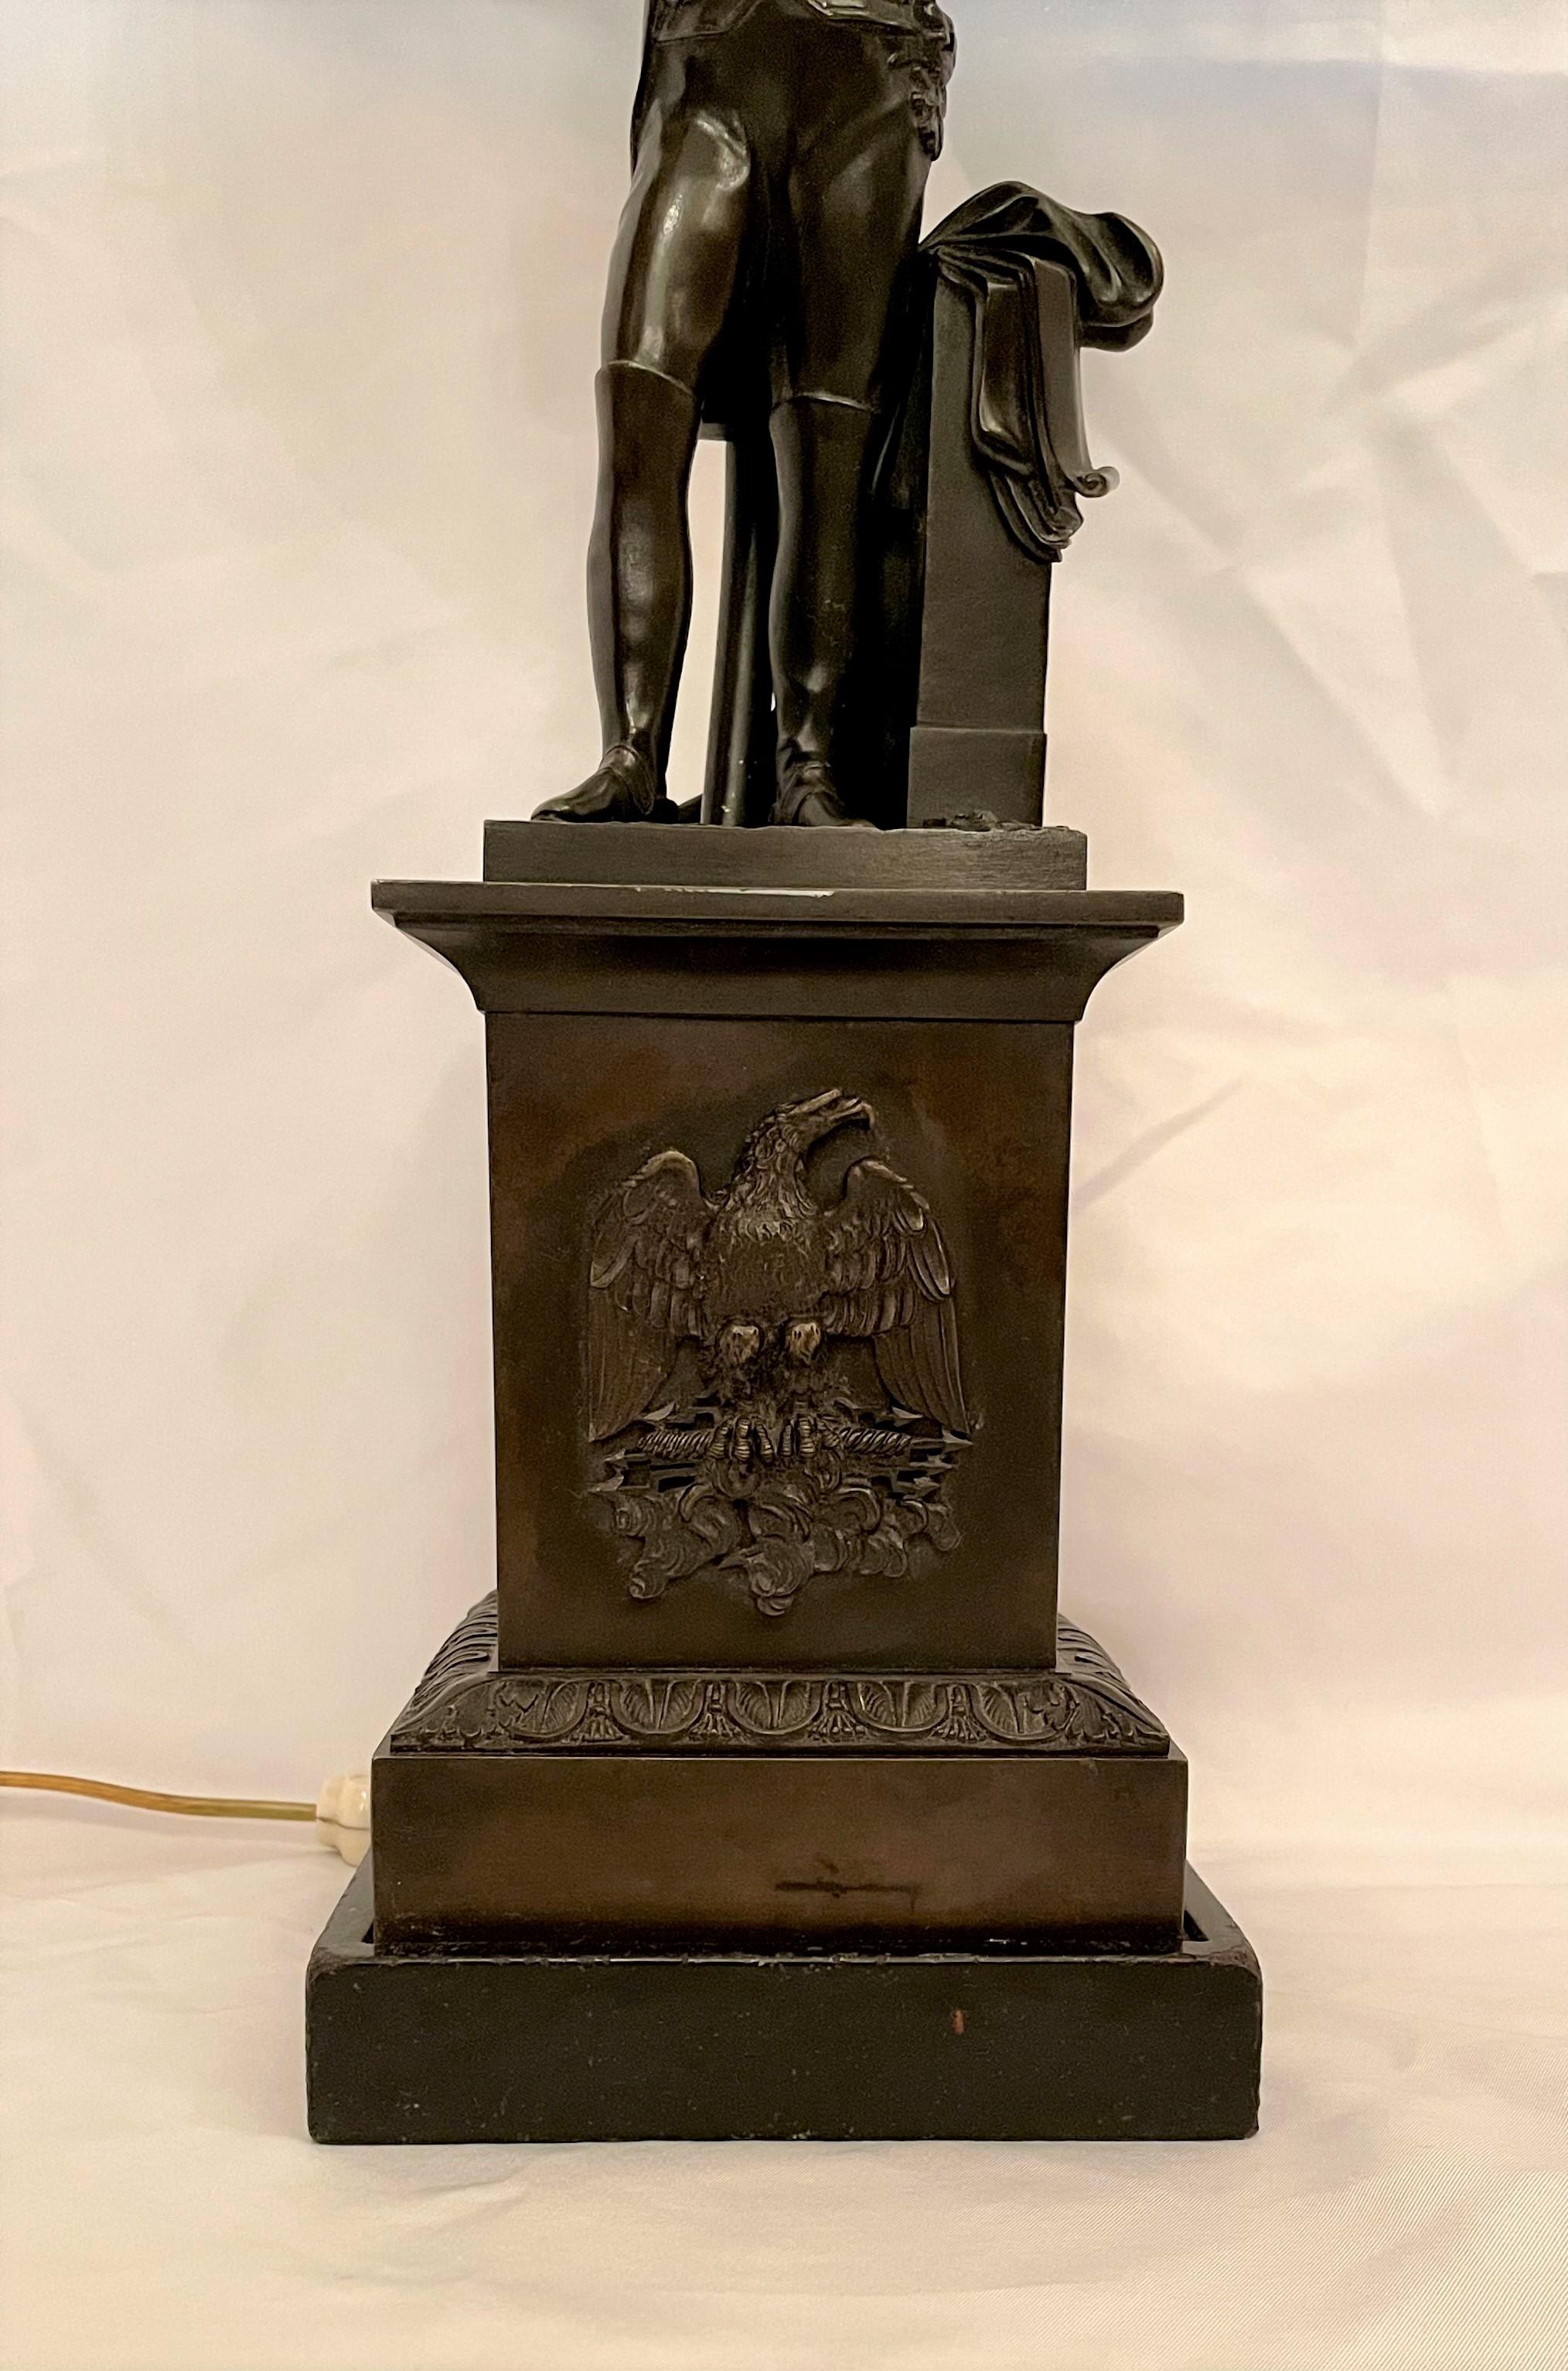 Estate French lamp with classical Napoleon Bonaparte Statue in Military Stance. Spelter-made.

Measures: 27